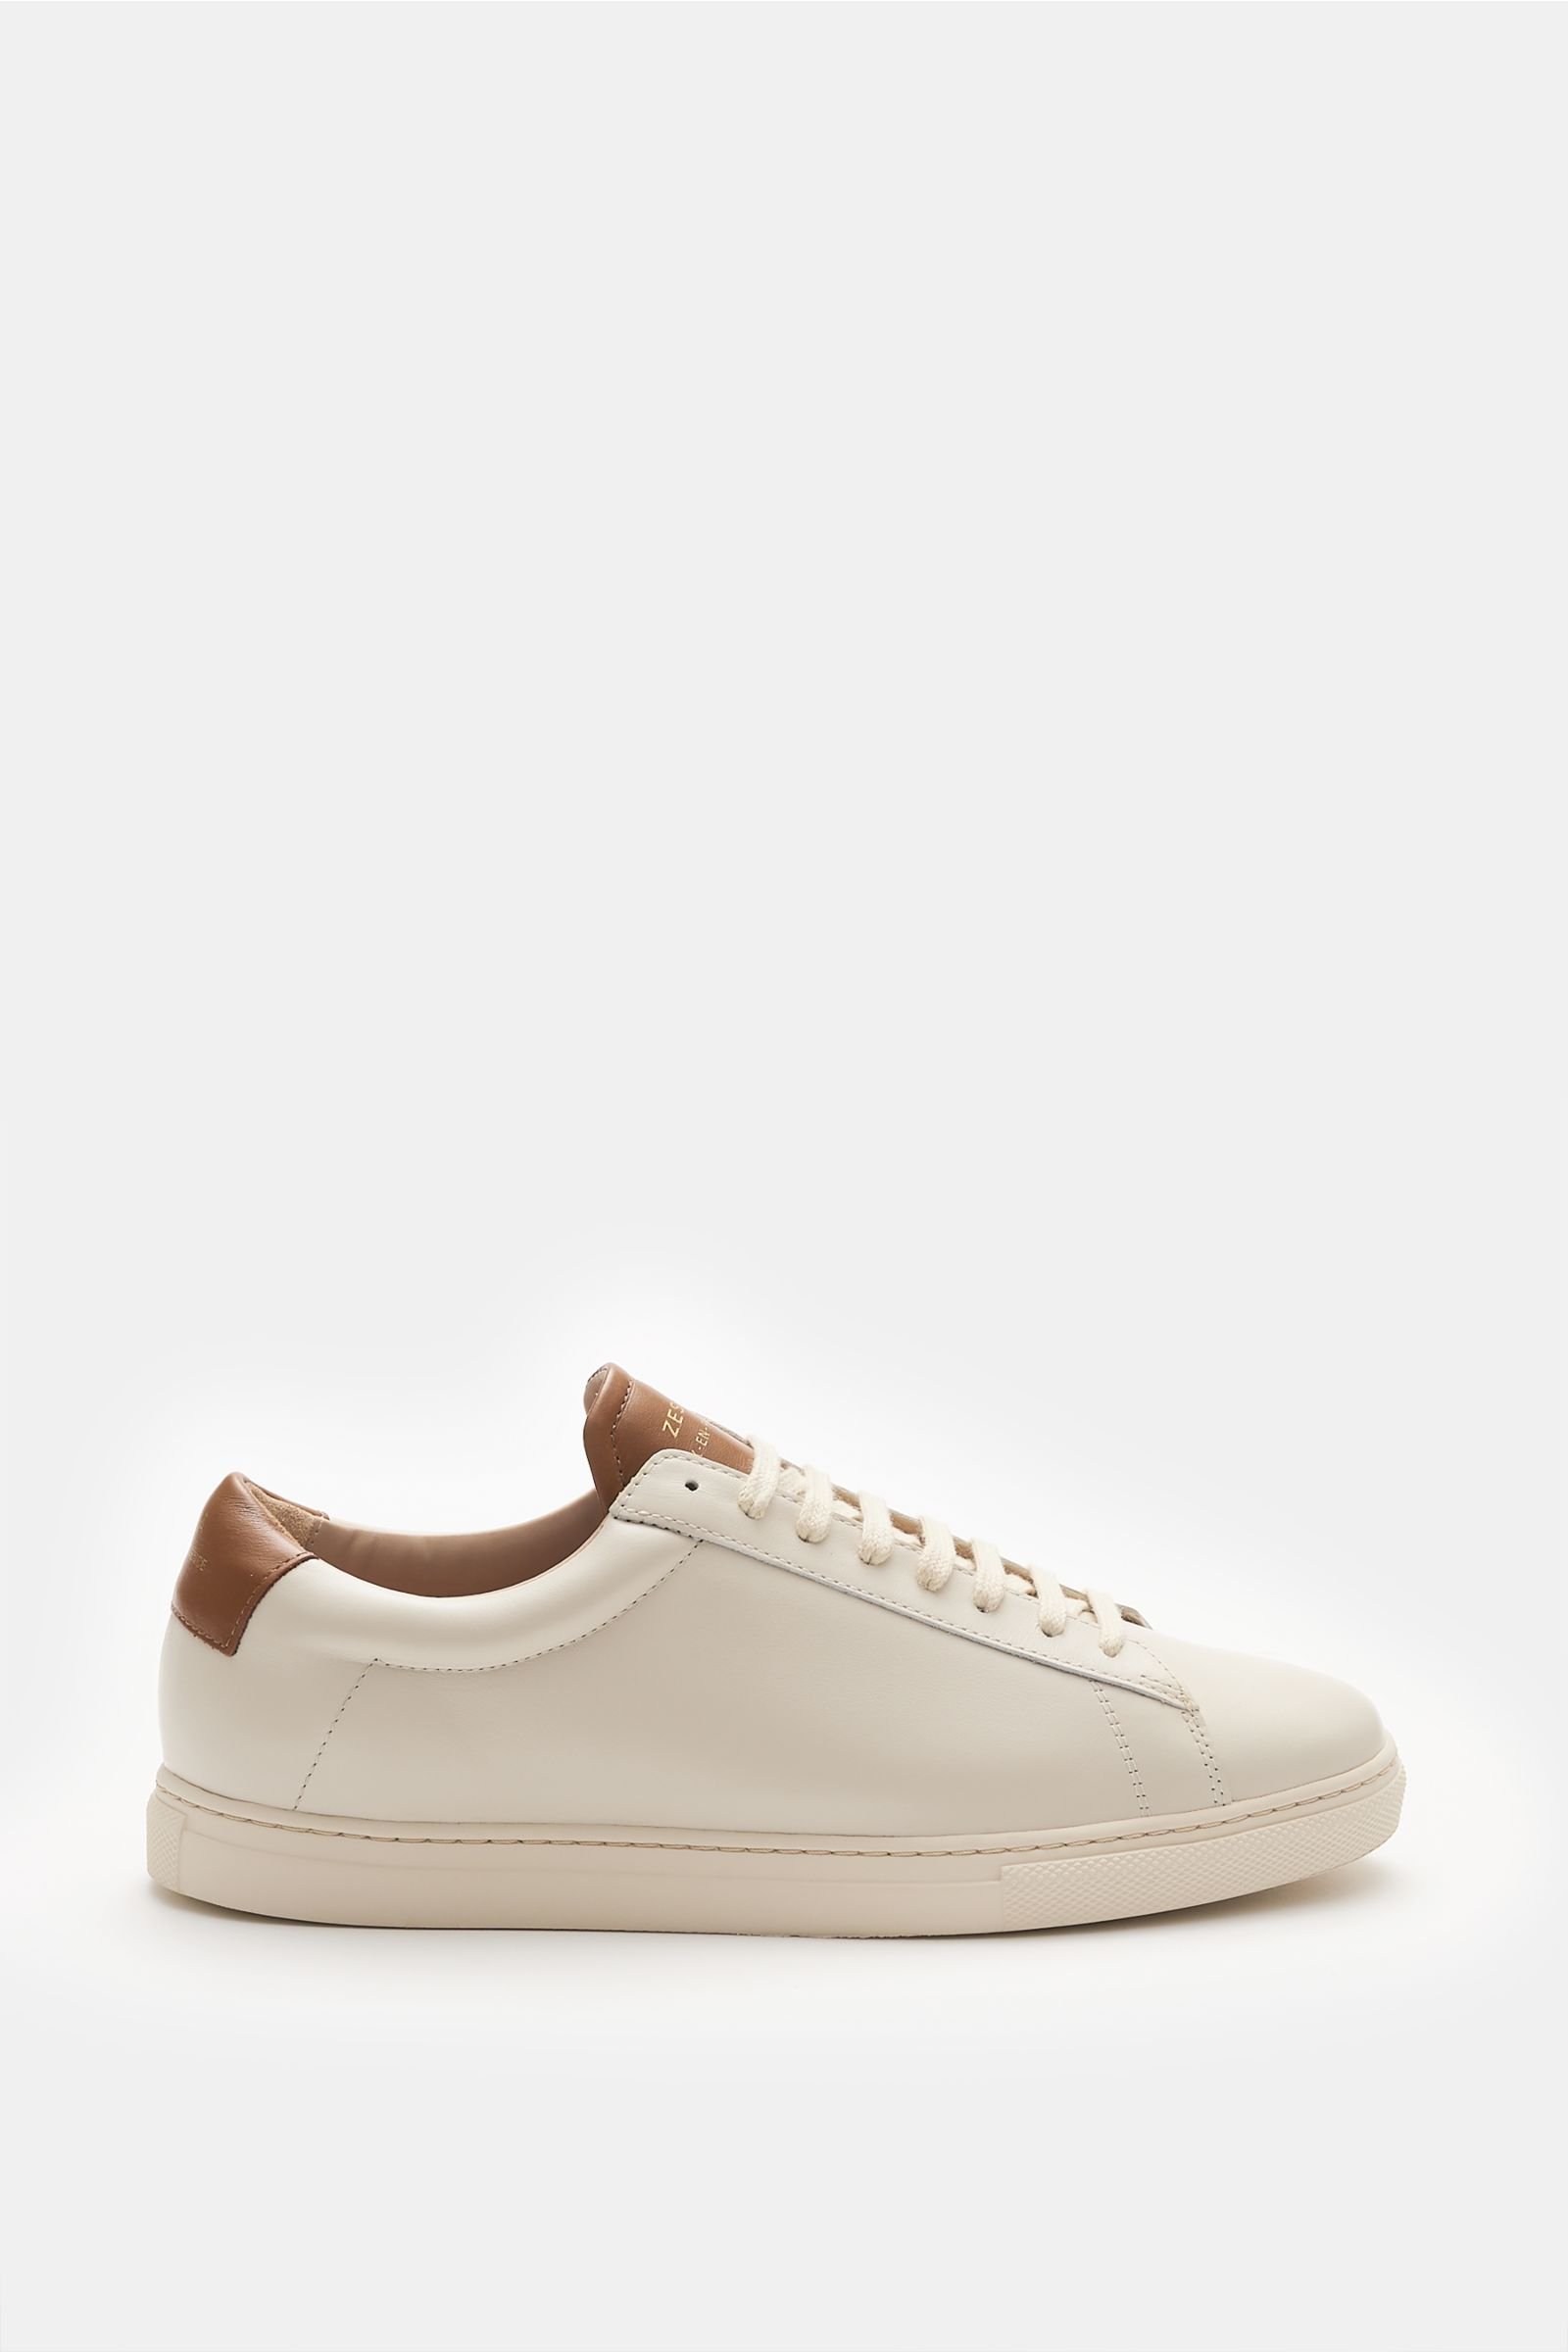 Sneakers 'ZSP4 APLA' cream/brown